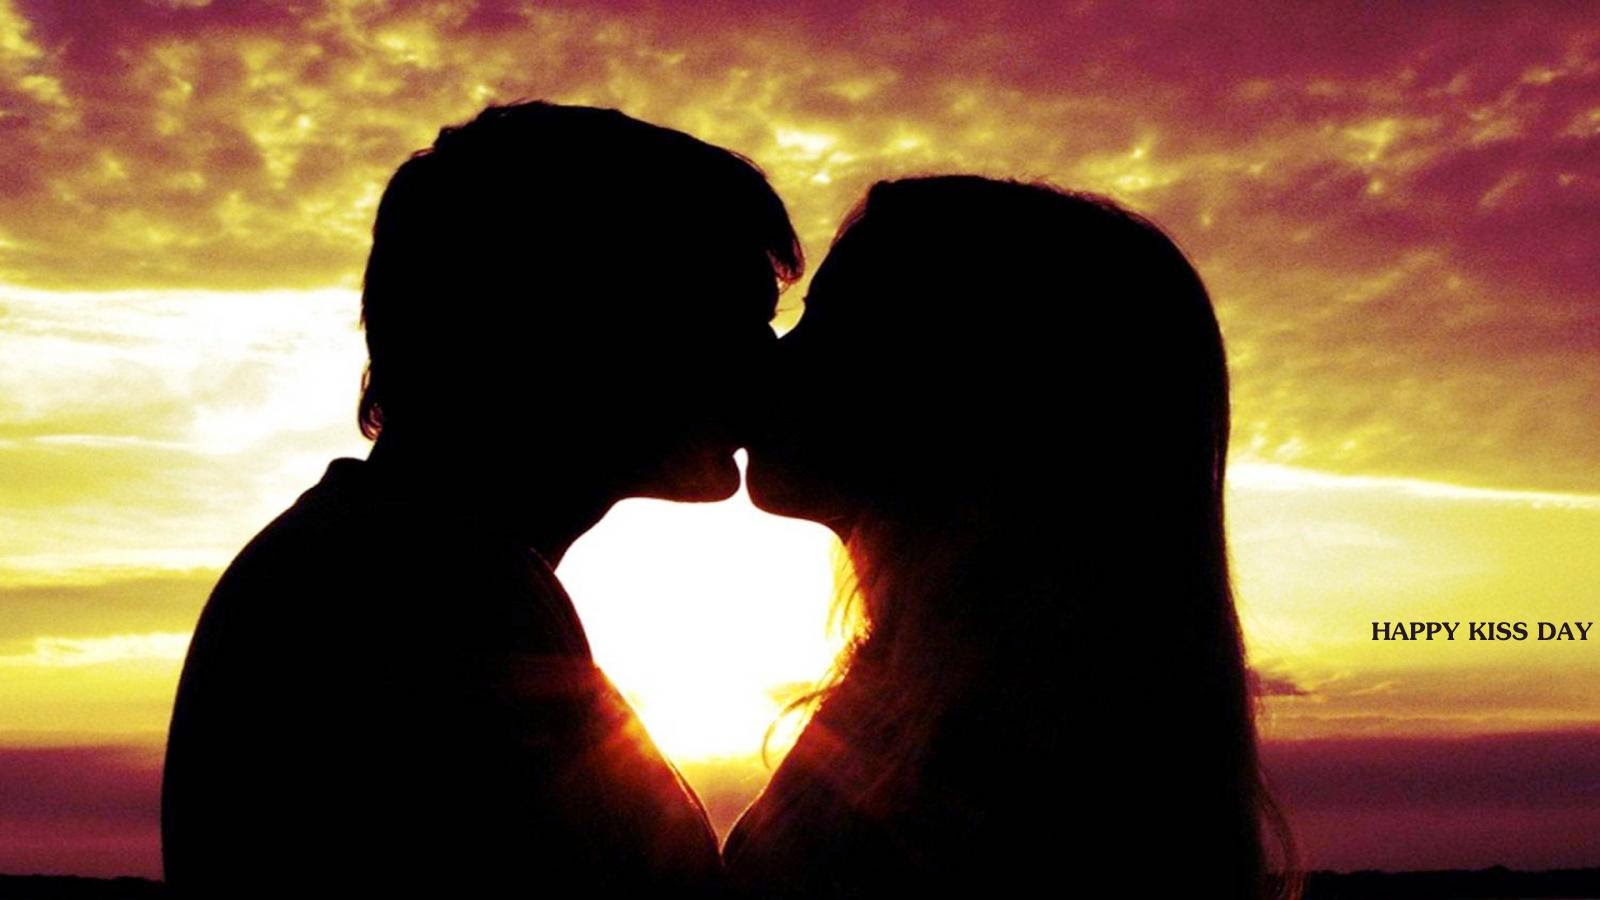 Kissing Hd Wallpaper Pack 38 Â€“ Free Download Â€“ - Kiss Day Images 2018 , HD Wallpaper & Backgrounds